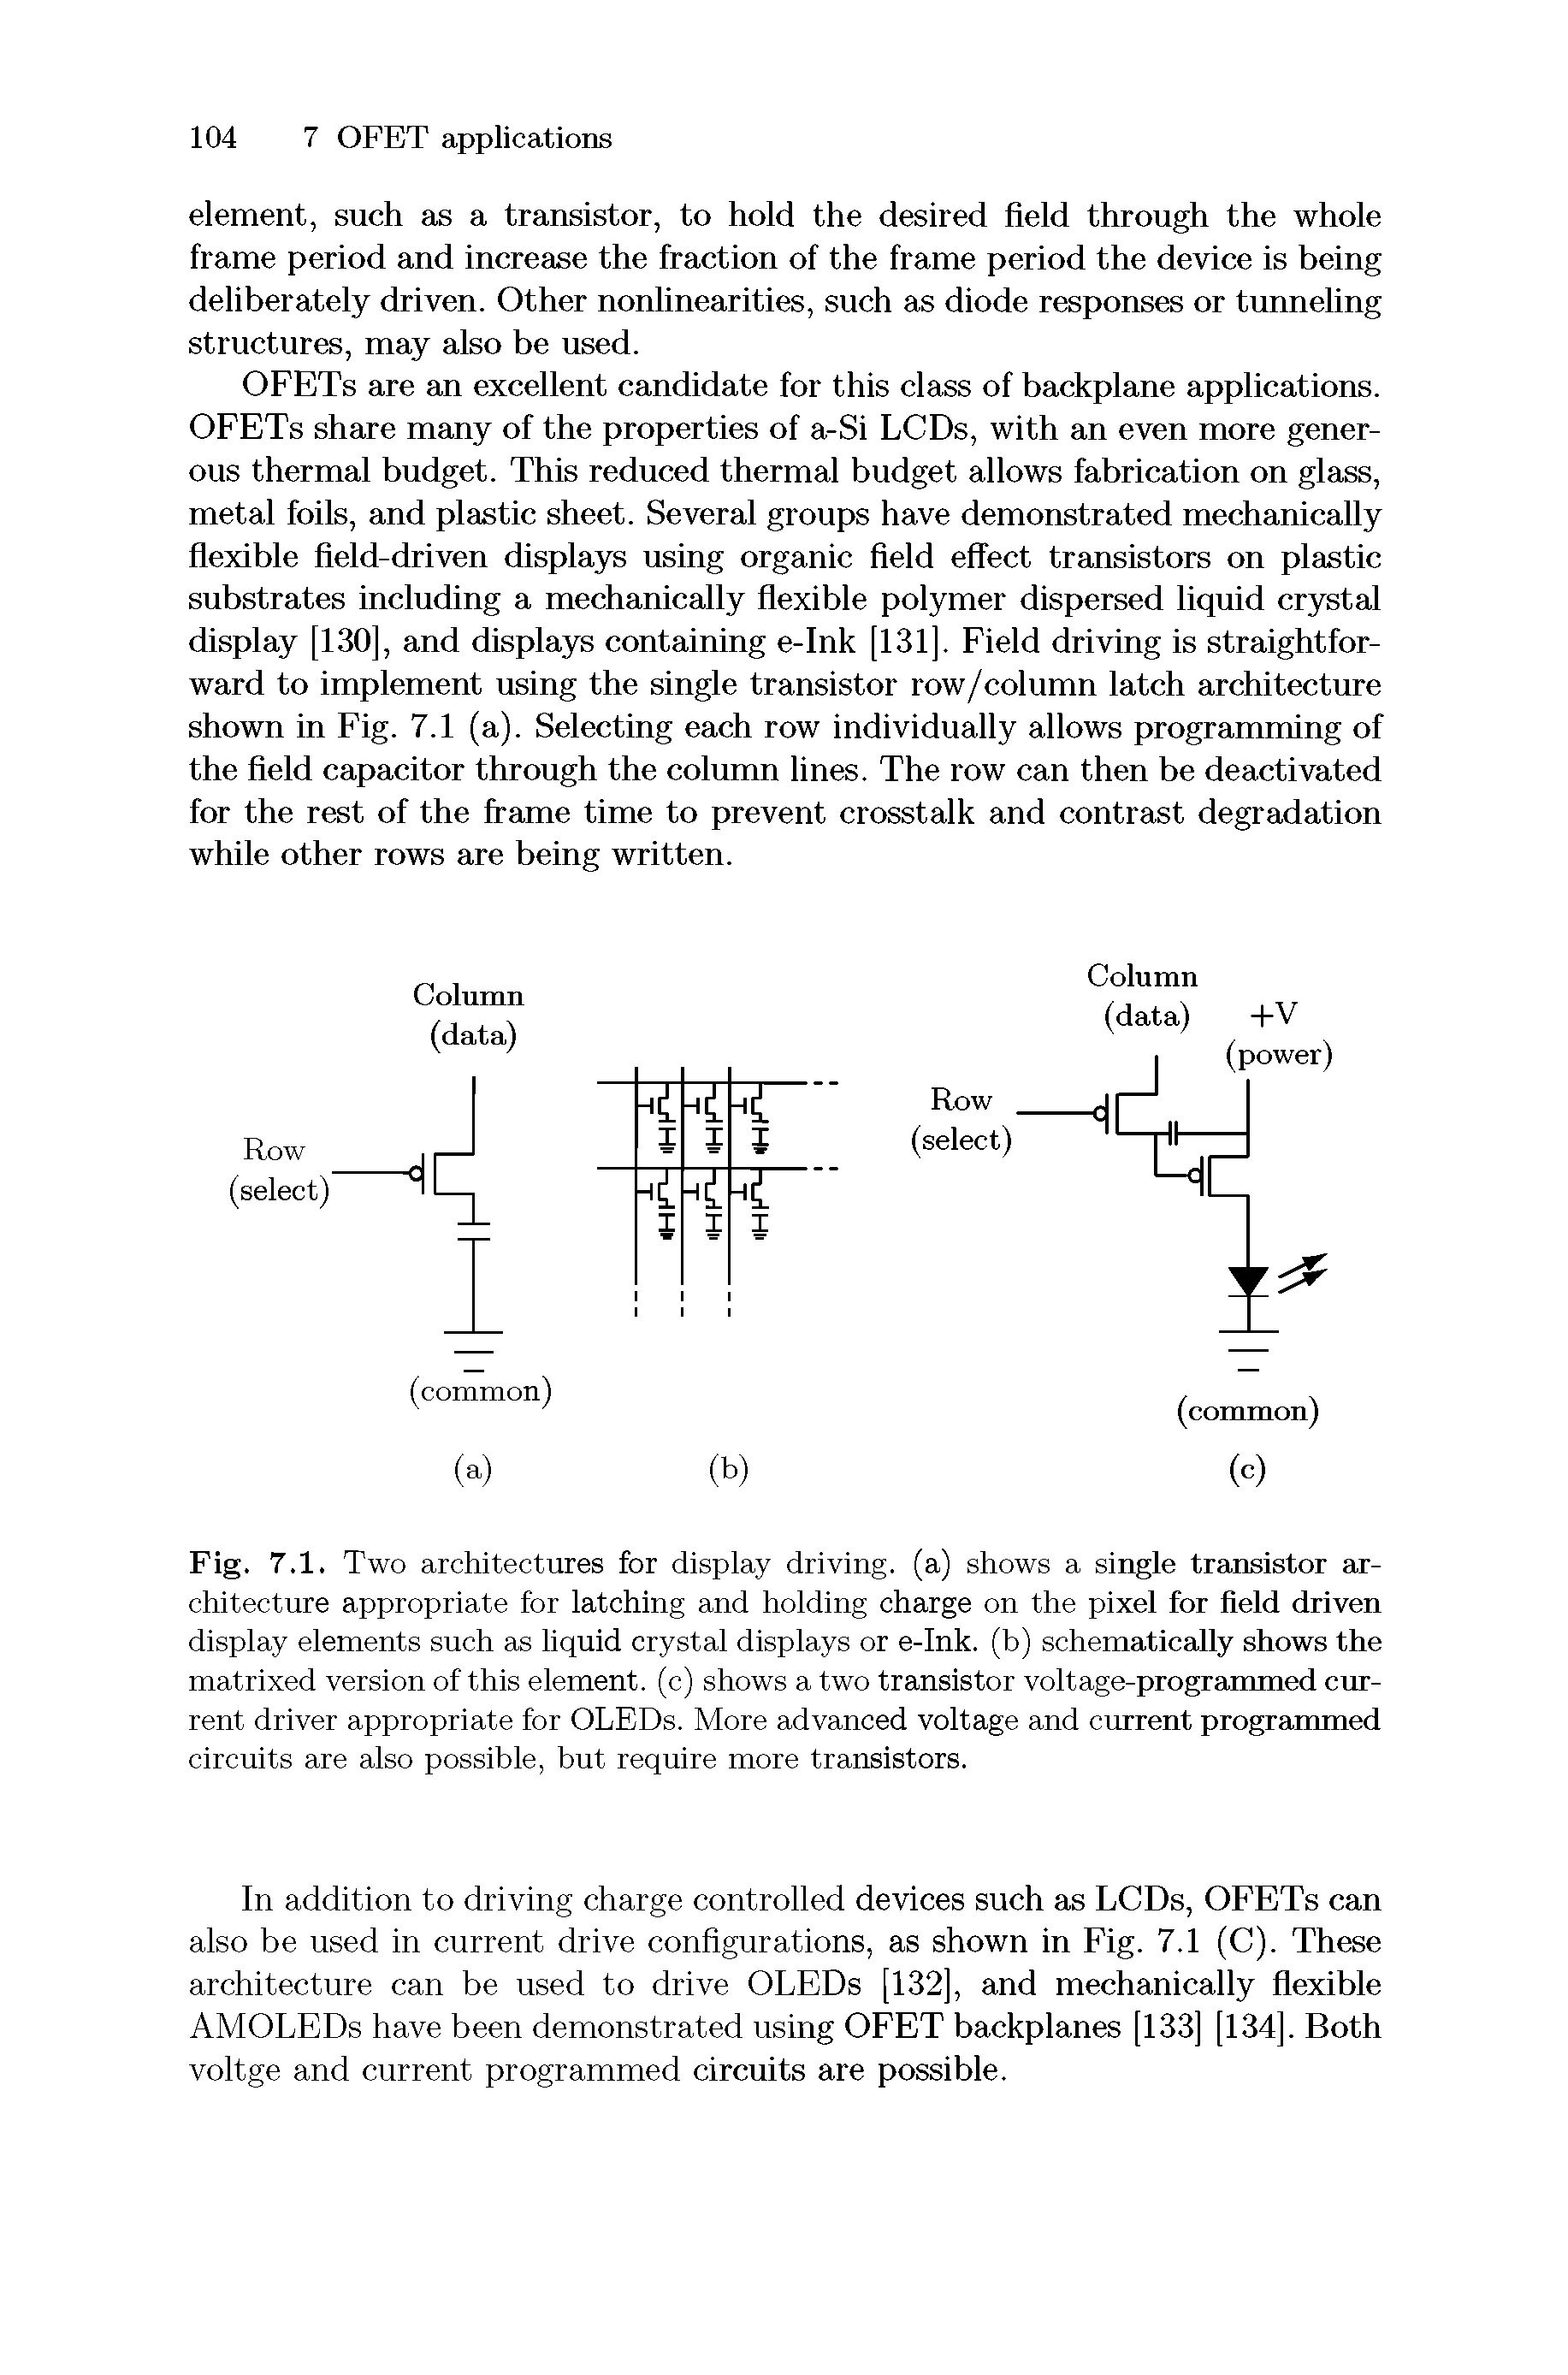 Fig. 7.1. Two architectures for display driving, (a) shows a single transistor architecture appropriate for latching and holding charge on the pixel for field driven display elements such as liquid crystal displays or e-Ink. (b) schematically shows the matrixed version of this element, (c) shows a two transistor voltage-programmed current driver appropriate for OLEDs. More advanced voltage and current programmed circuits are also possible, but require more transistors.